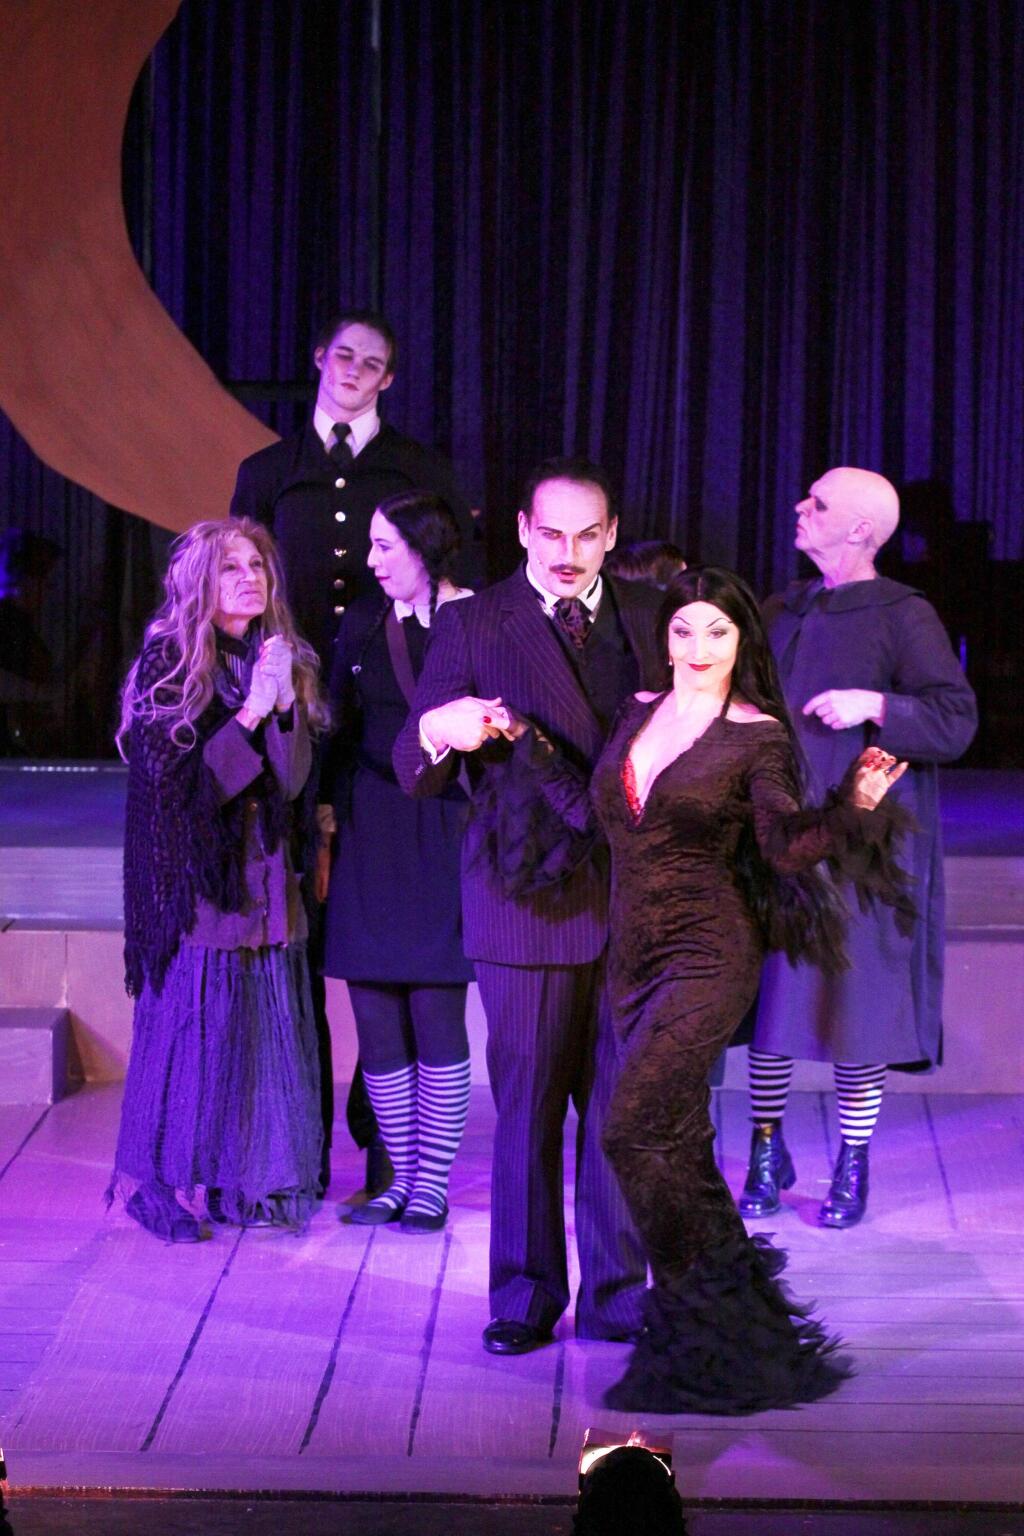 'The Addams Family,' a new musical by 6th Street Playhouse at the G.K. Hardt Theatre. From left: Mollie Boice as Grandma, William Keyes Schlosser as Lurch, Shawna Olivia Eiermann as Wednesday Adams, Michael RJ Campbell as Gomez Addams, Shannon Rider as Morticia Addams and Kit Grimm as Uncle Fester. (photo: ERIC CHAZANKIN)